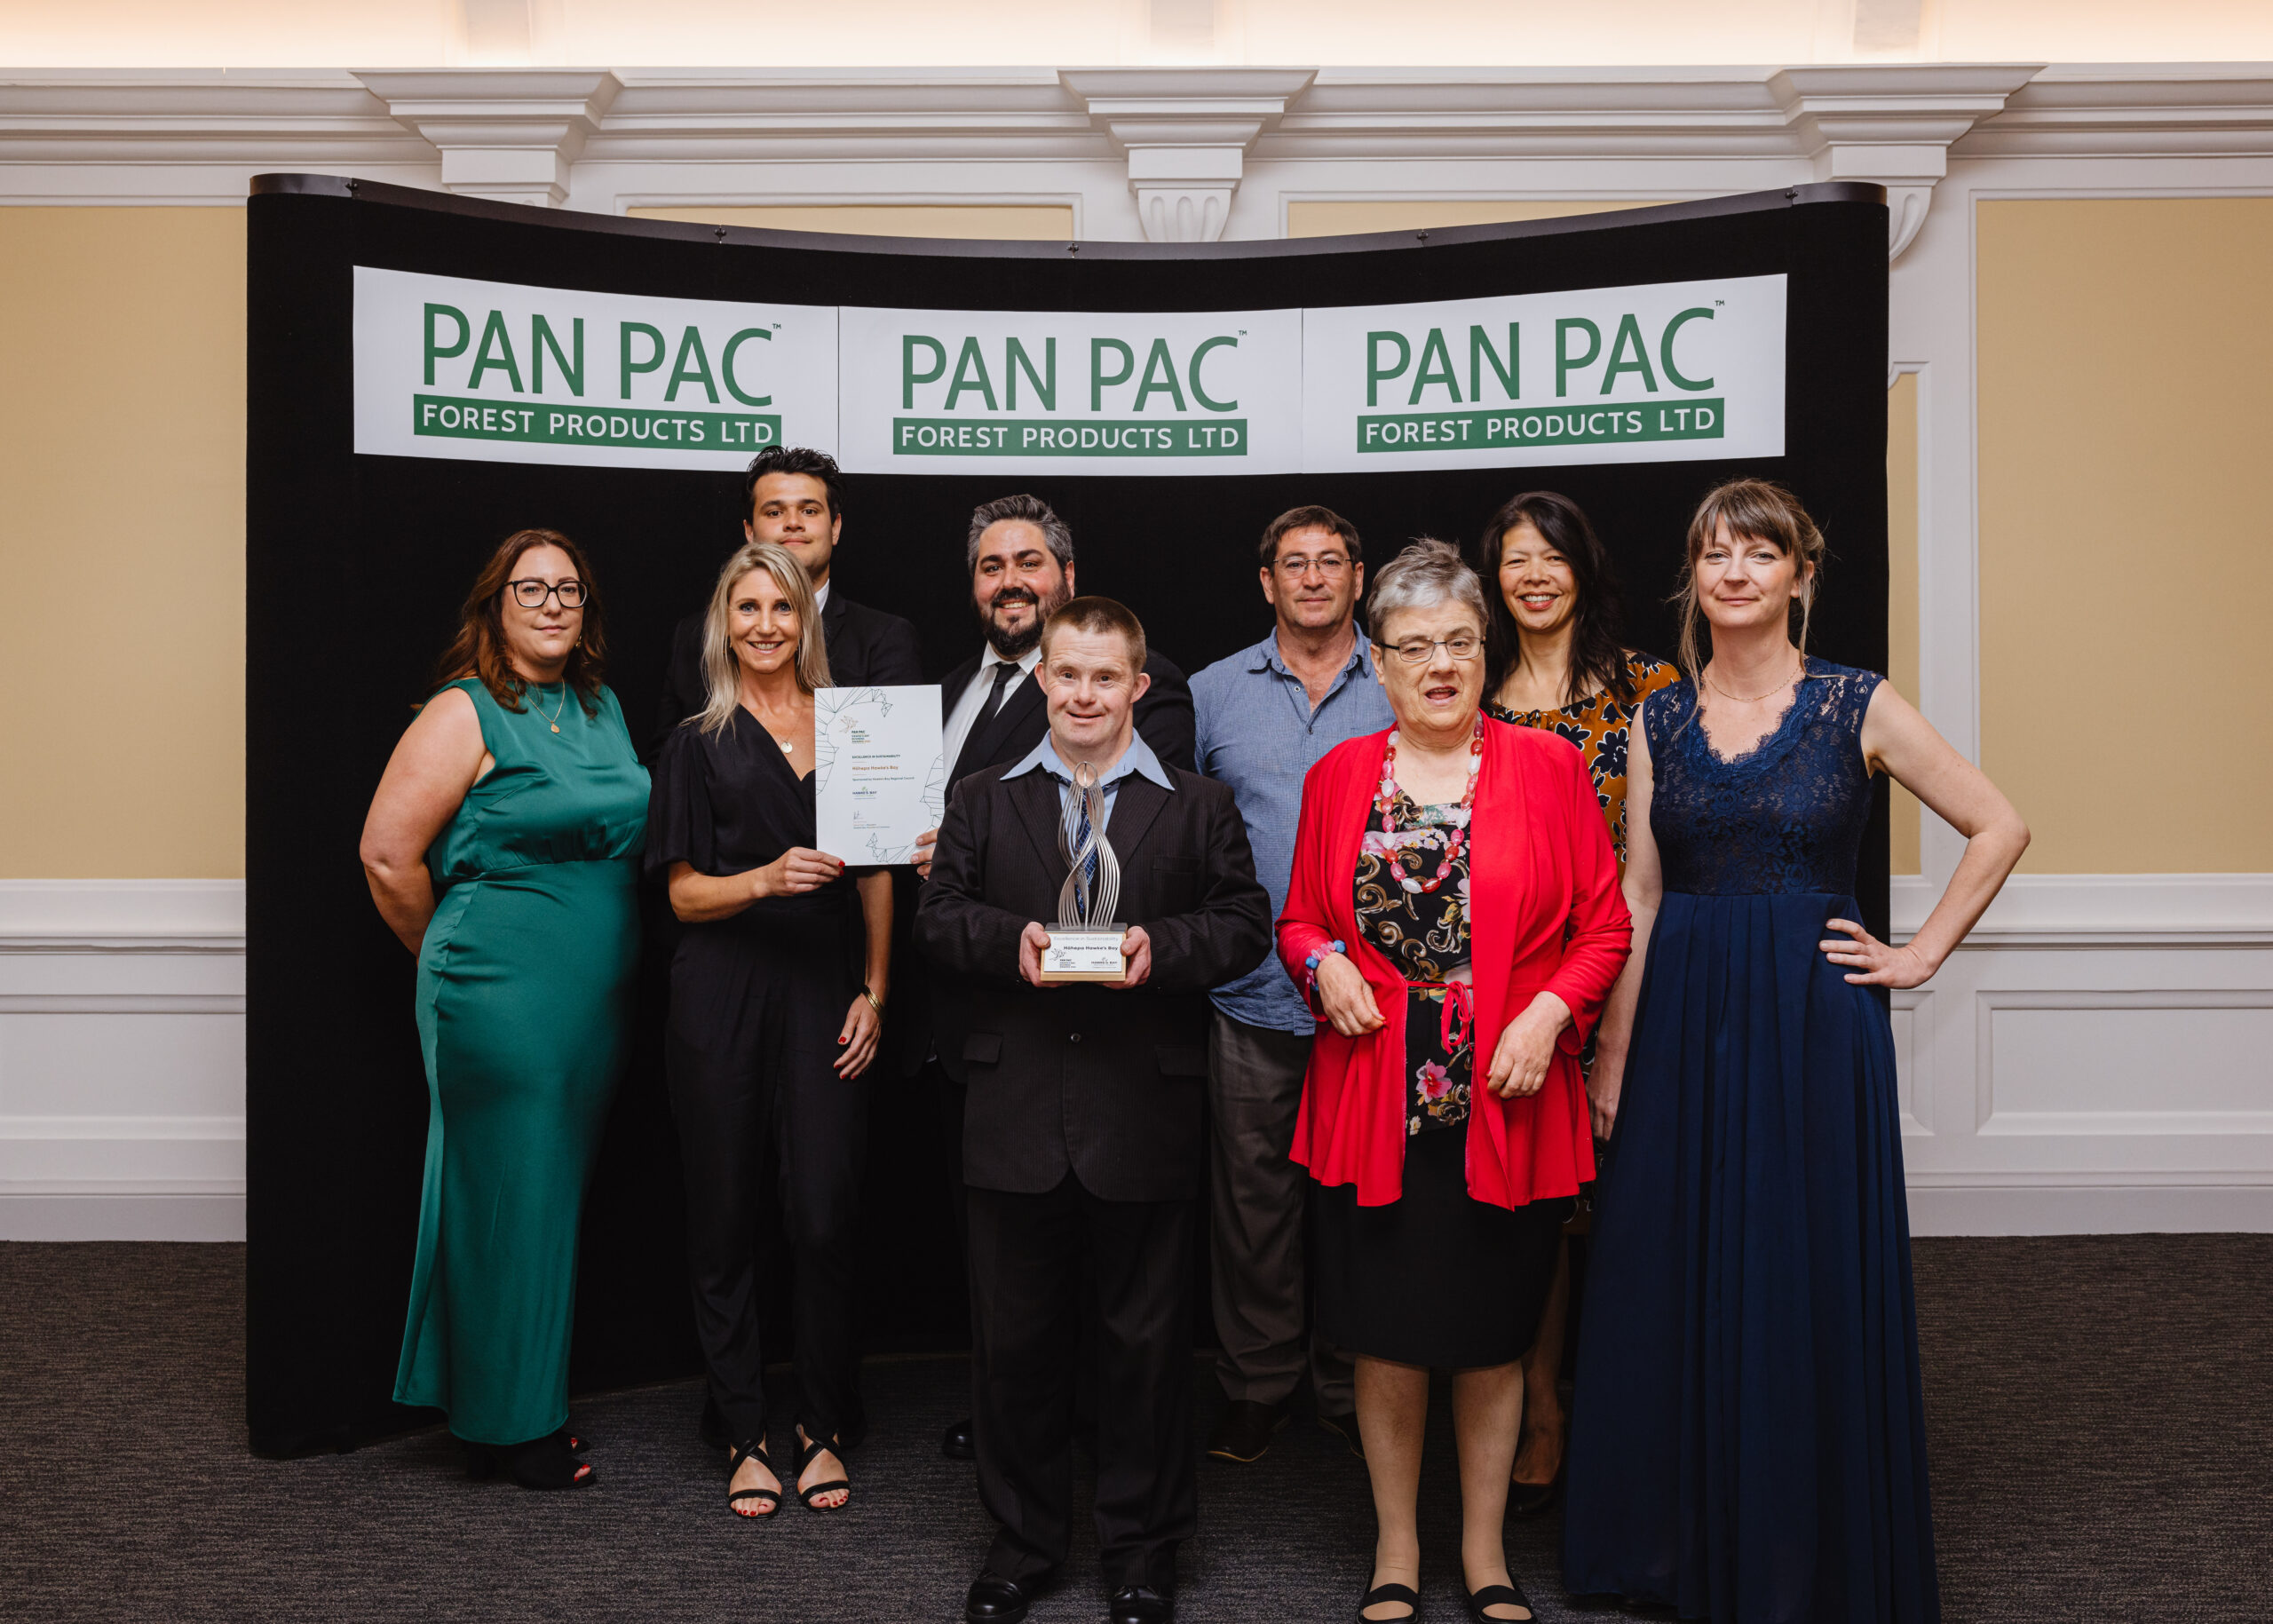 "Excellence in Sustainability" Award at the Pan Pac Hawke's Bay Business Awards